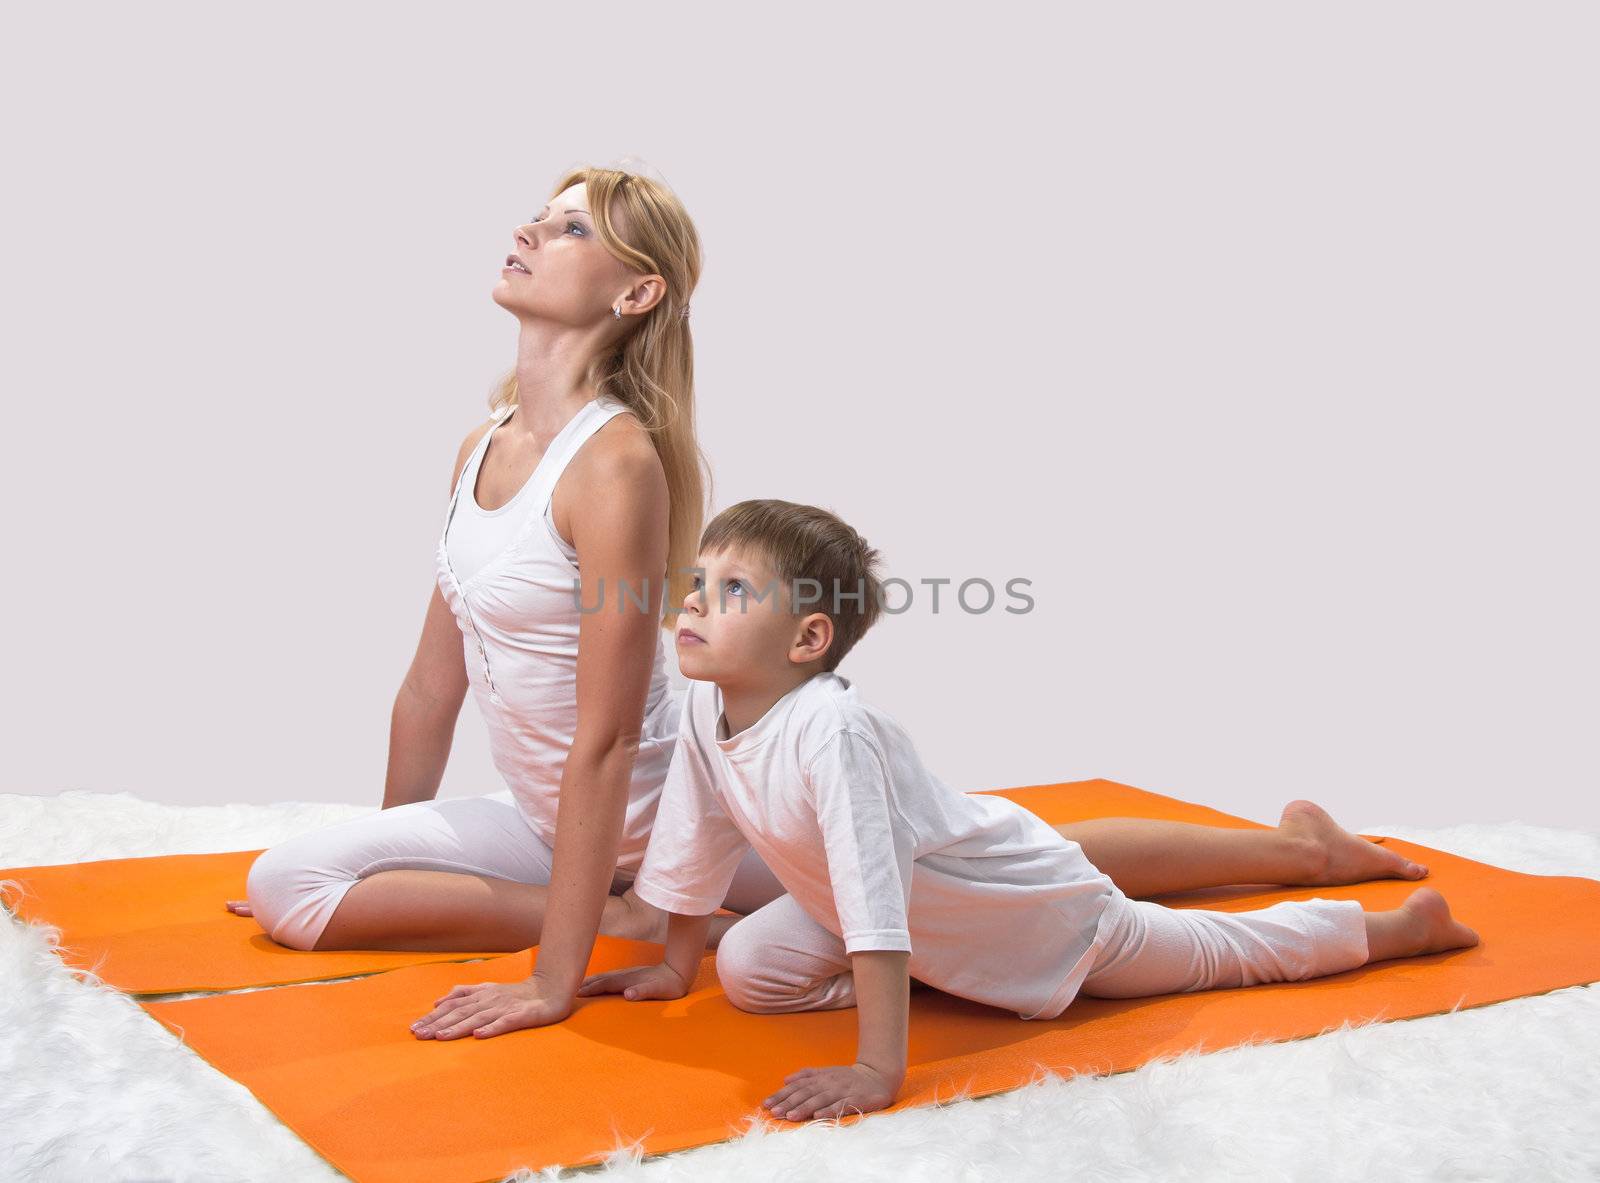 A beautiful young mother practices yoga with her son  by NickNick